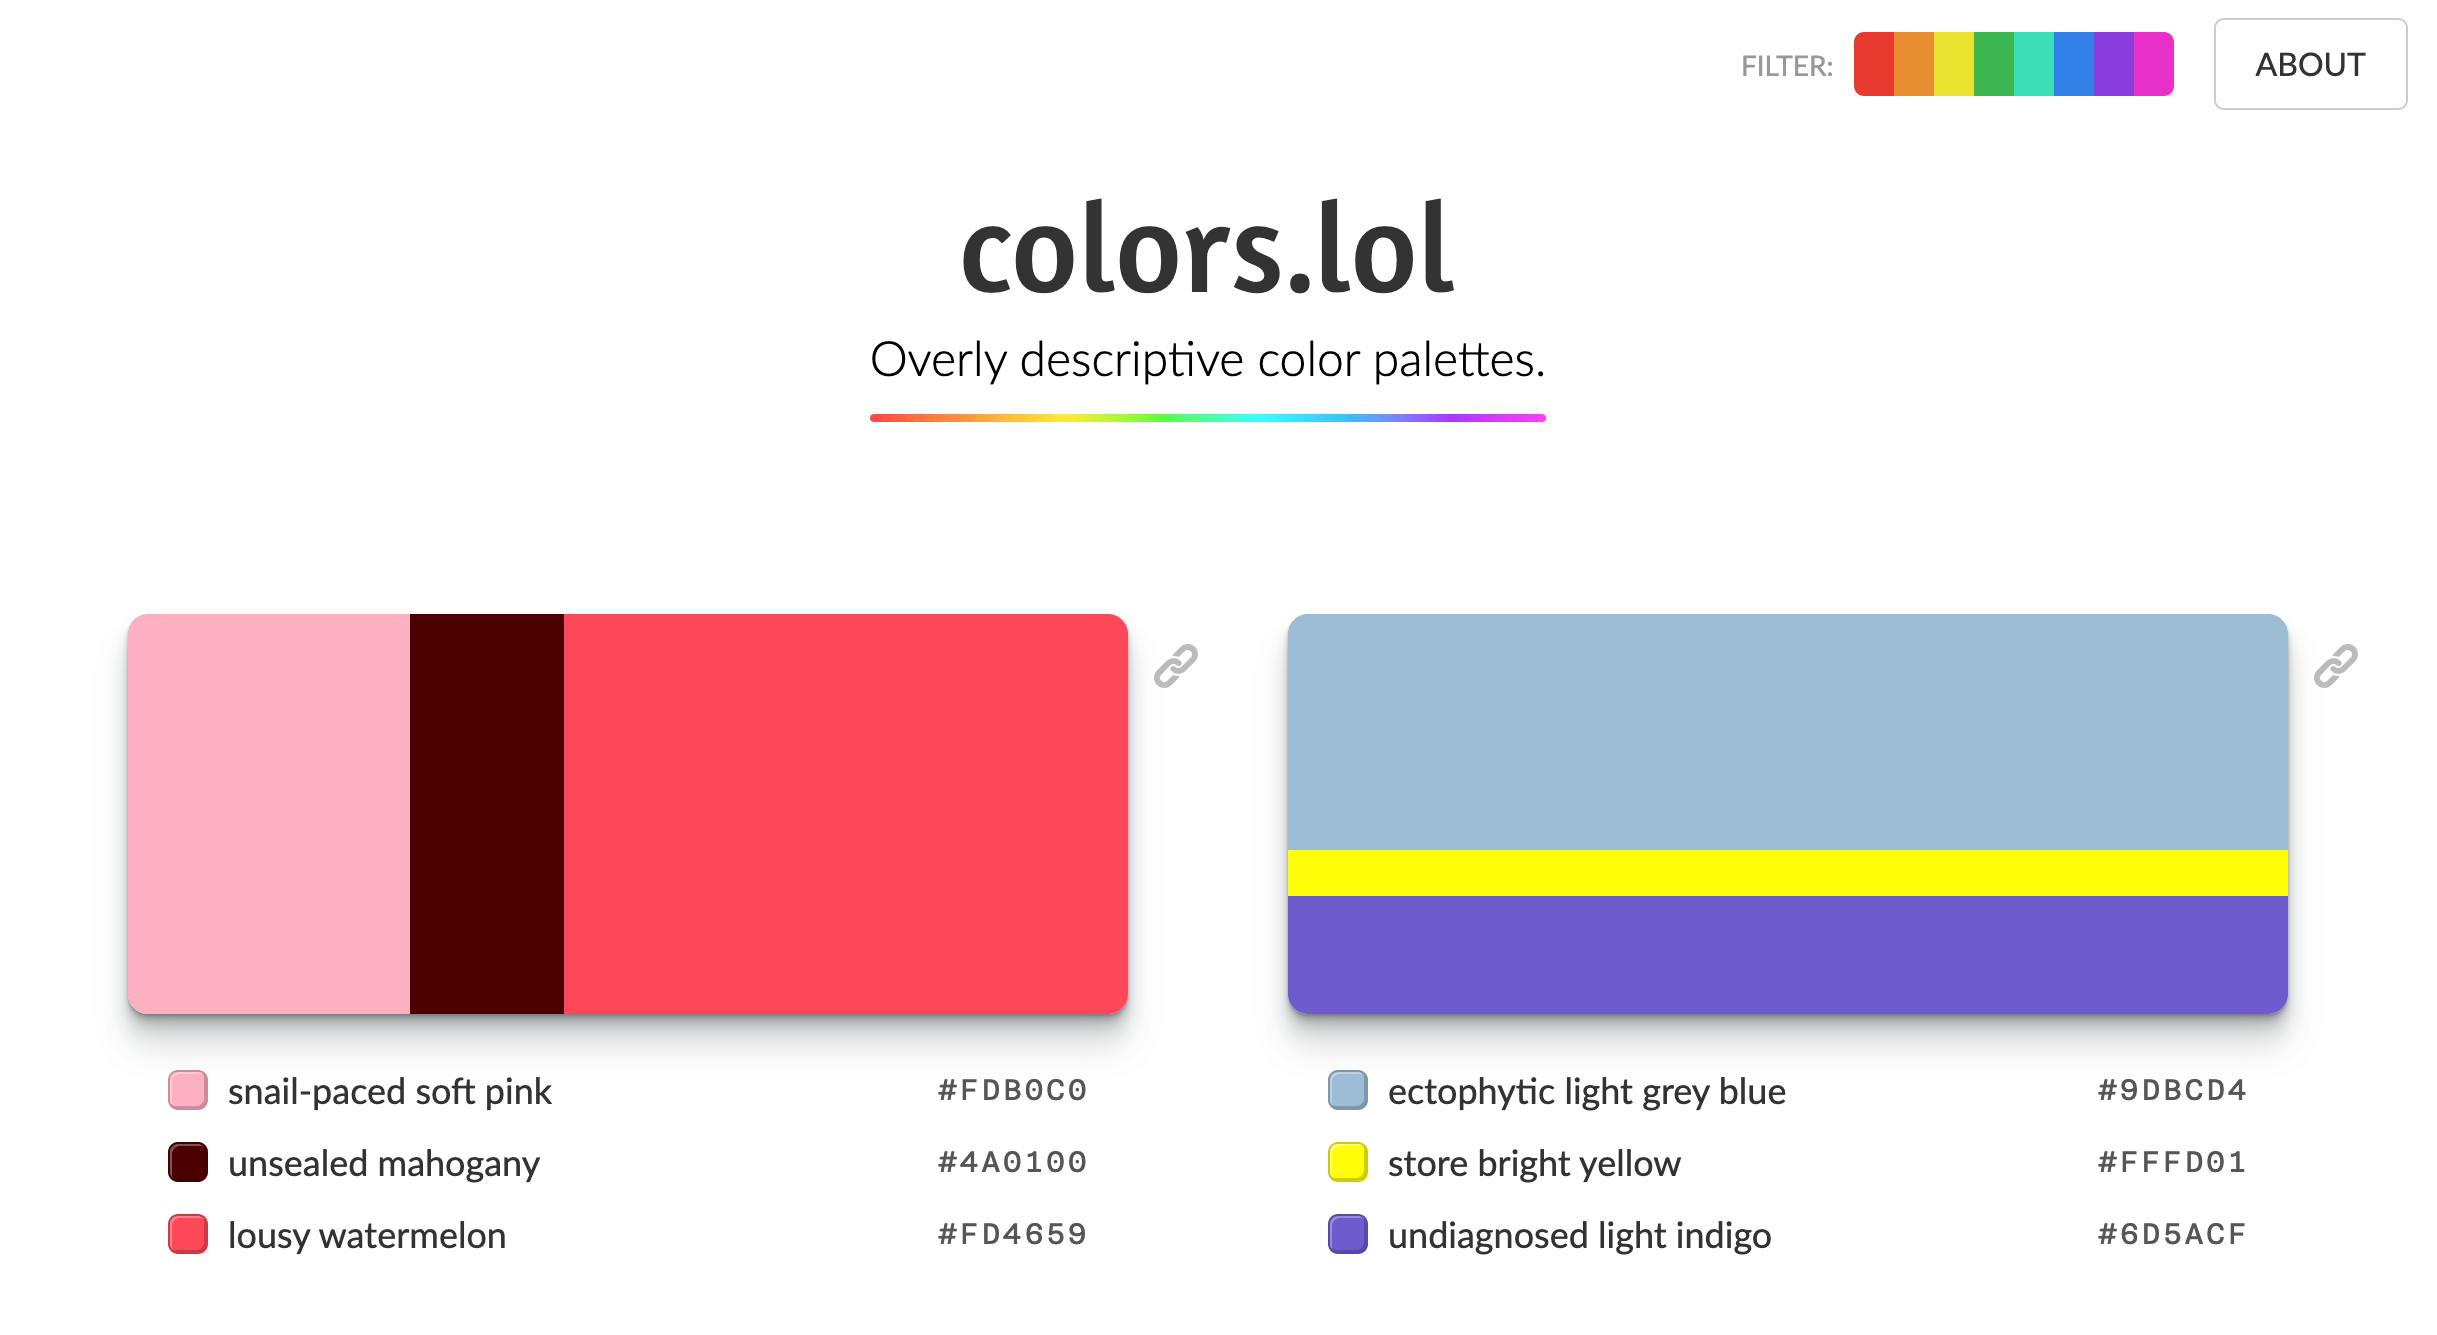 Colors.lol is officially the only .LOL domain I’ve ever heard of